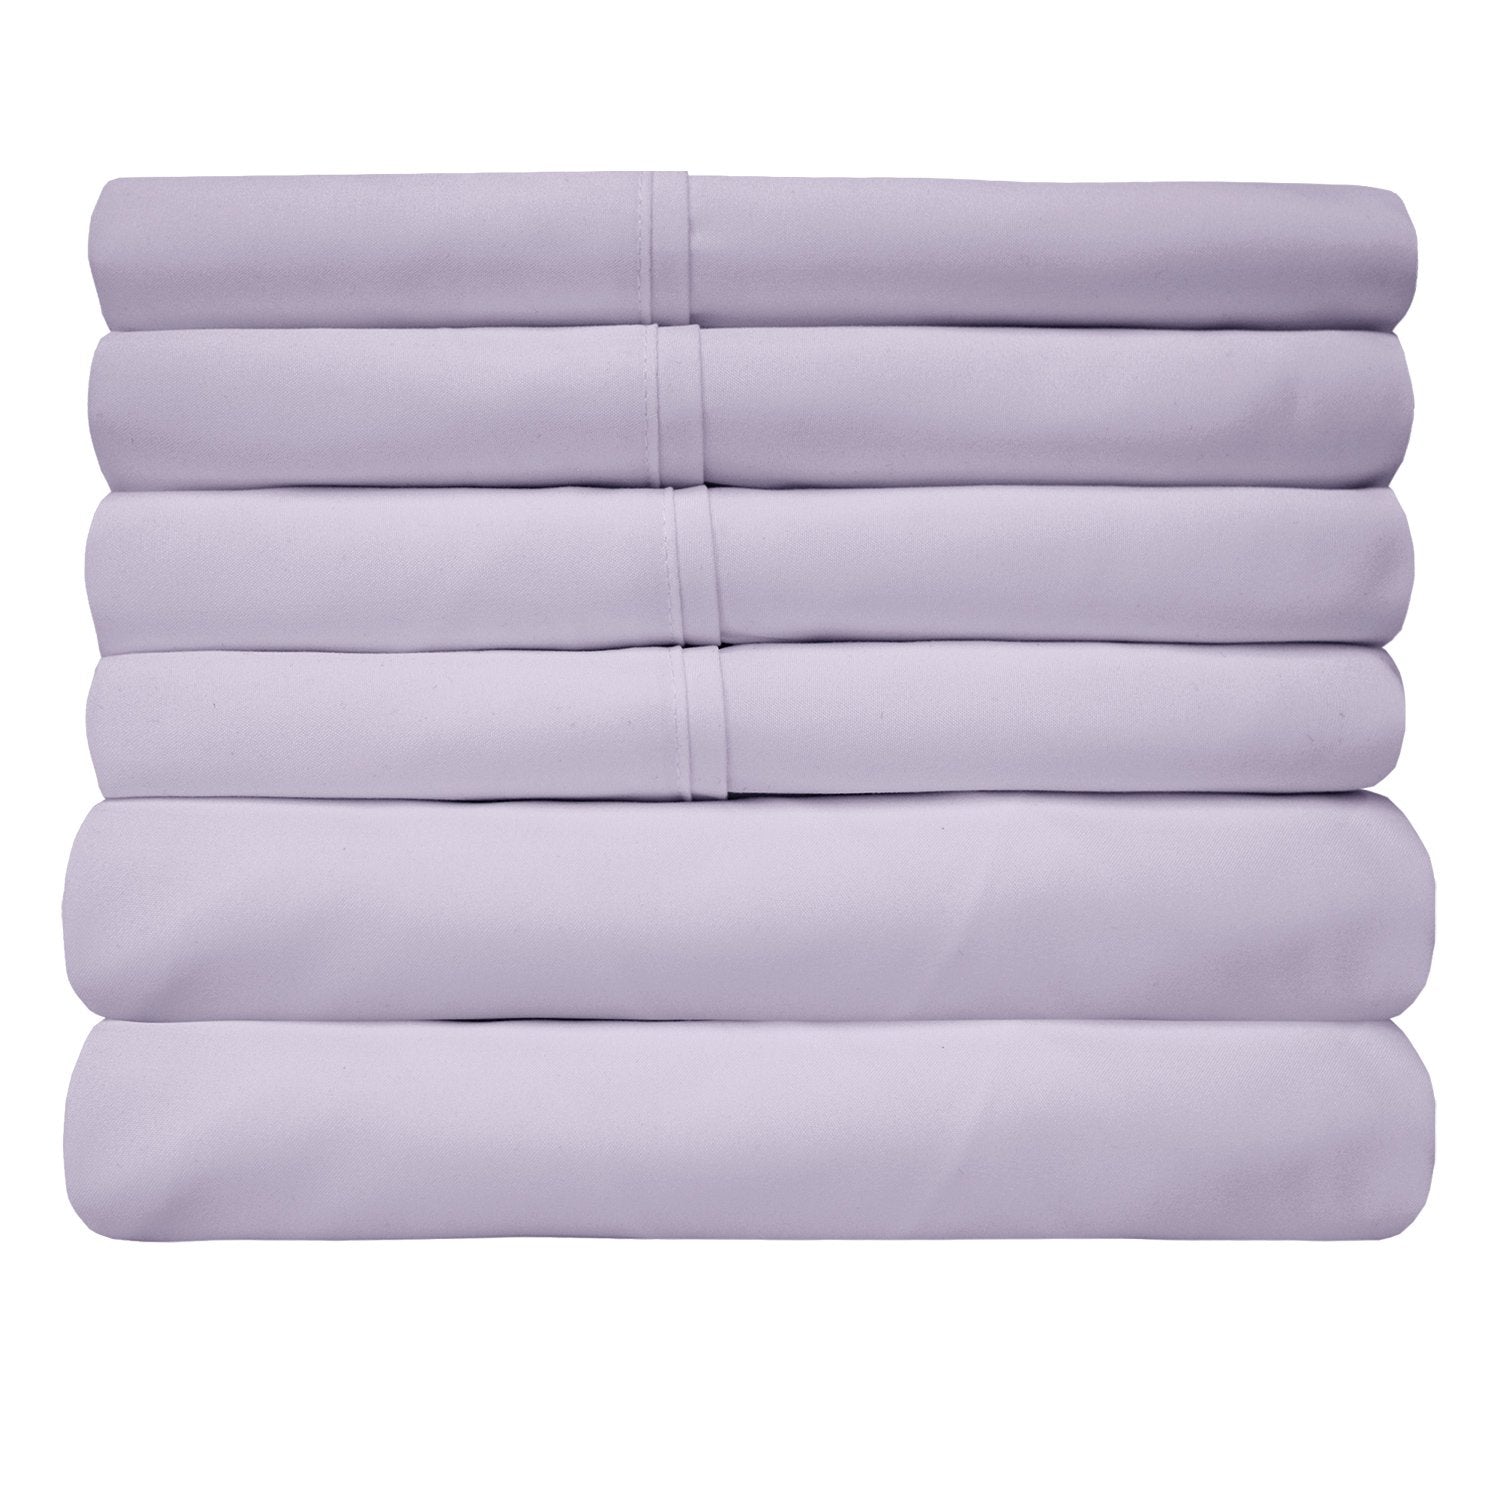 Deluxe 6-Piece Bed Sheet Set (Lilac) - Folded 2